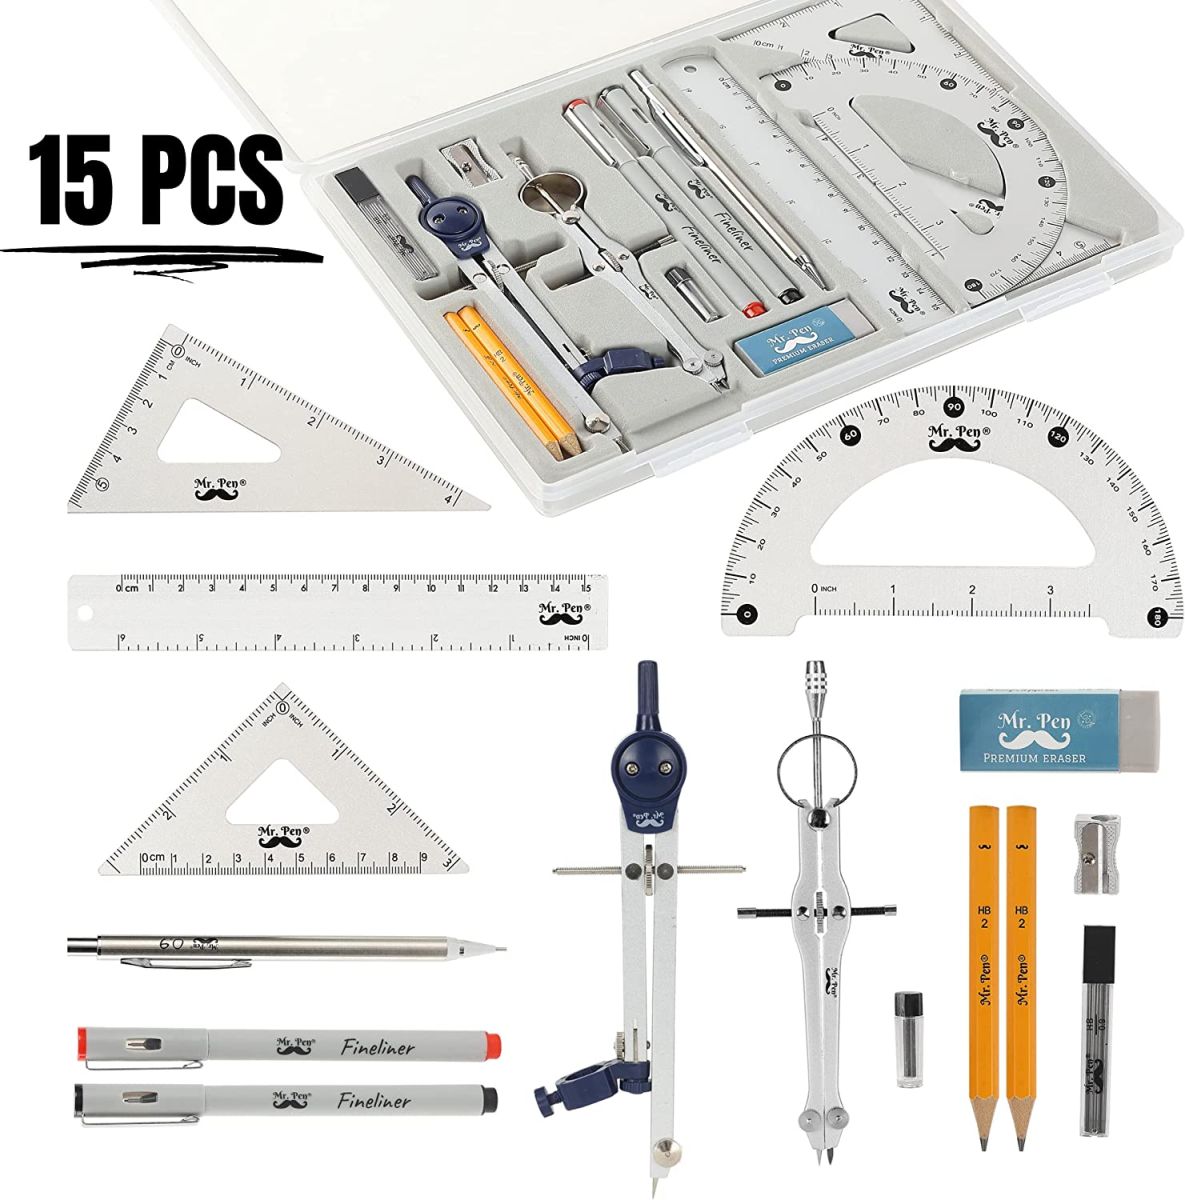 Professional Geometry Set, 15 pcs, Geometry Kit for Artists and Students, Geometry Set, Metal Rulers and Compasses, Drawing Tools, Drafting Supplies, Drafting Set, Drafting Tools and Kits